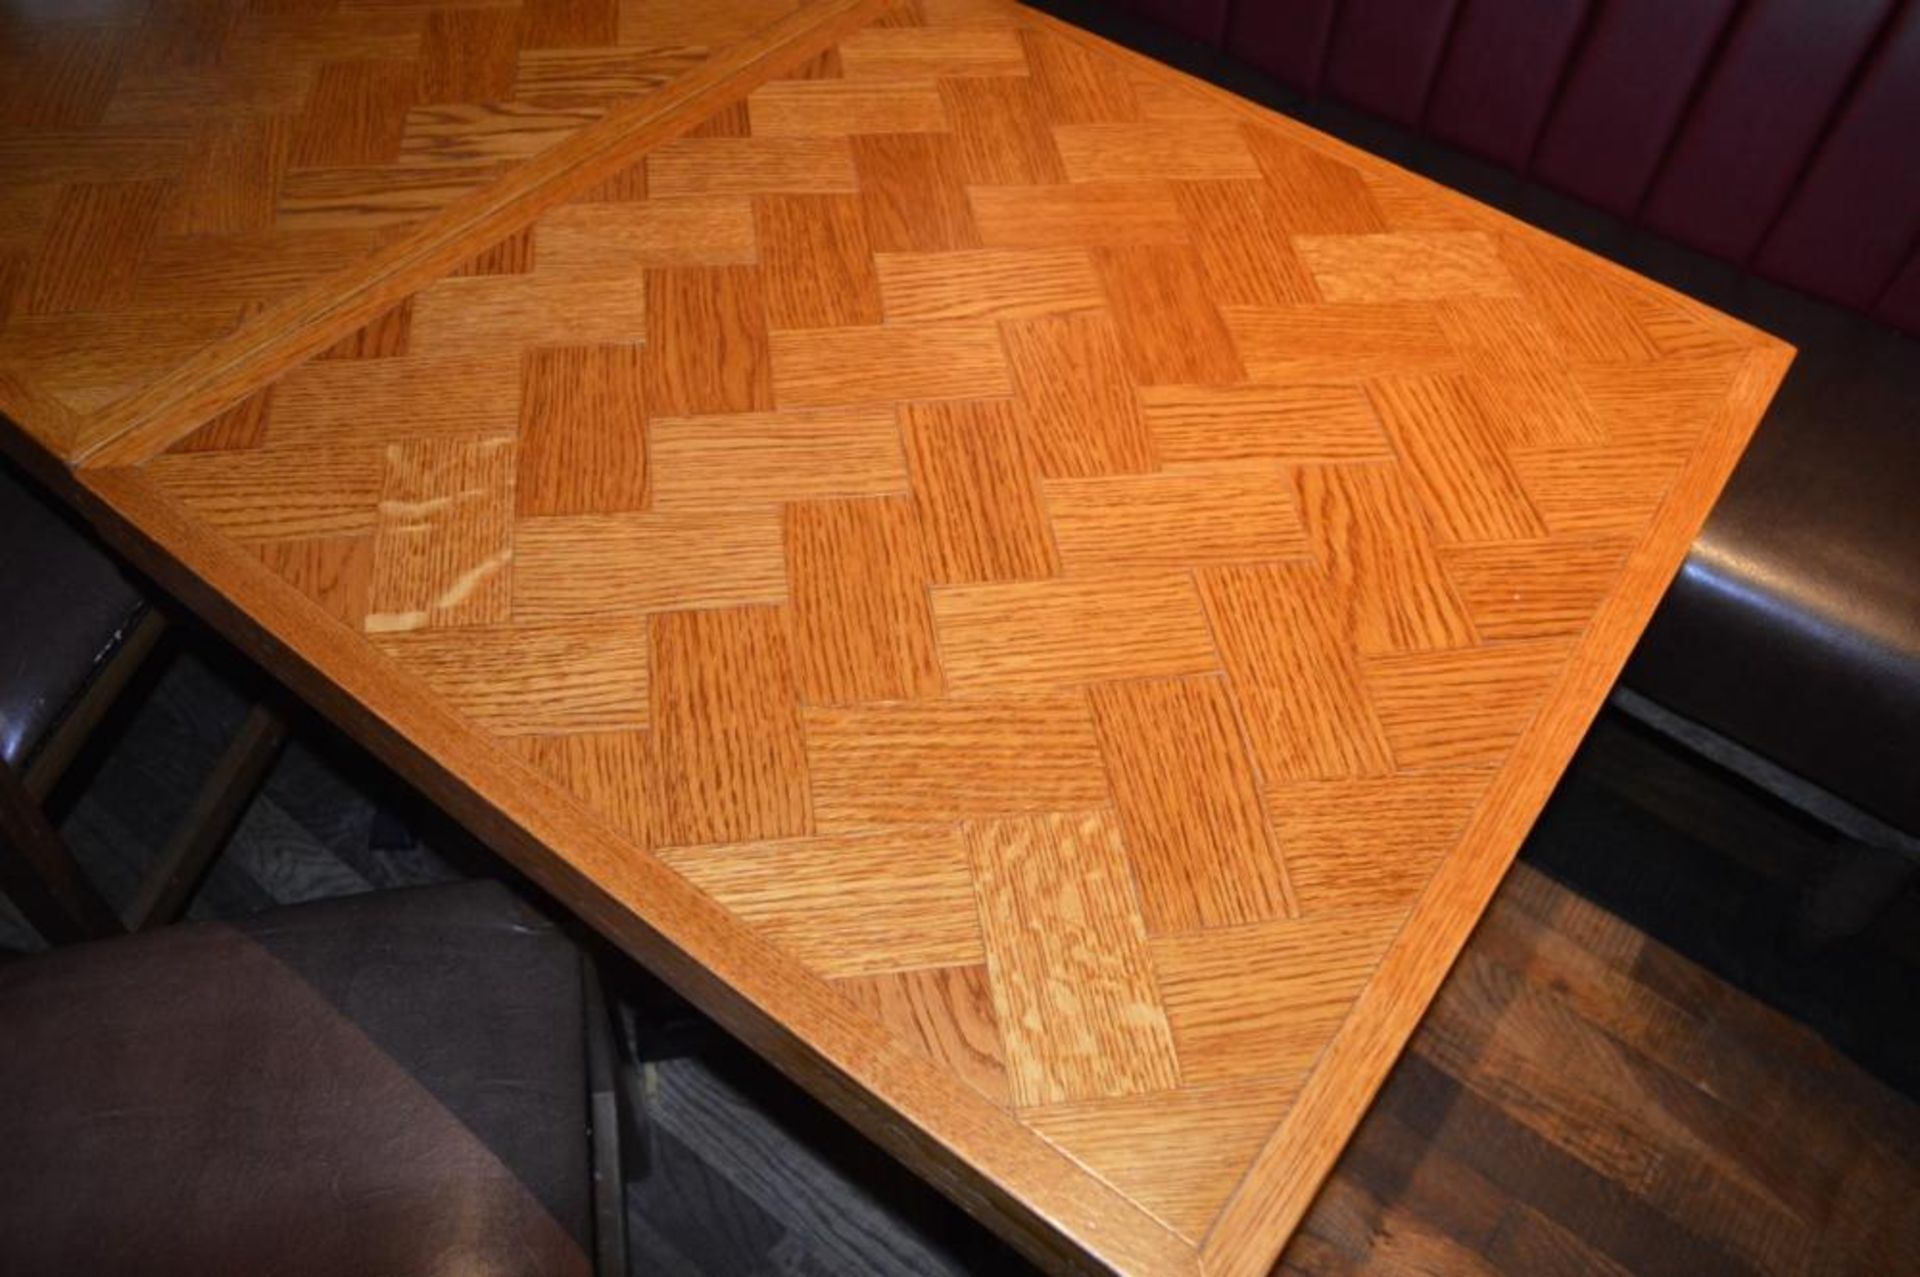 2 x Two Seater Restaurant Dining Tables With Parquet Style Tops and Cast Iron Bases - Image 9 of 9